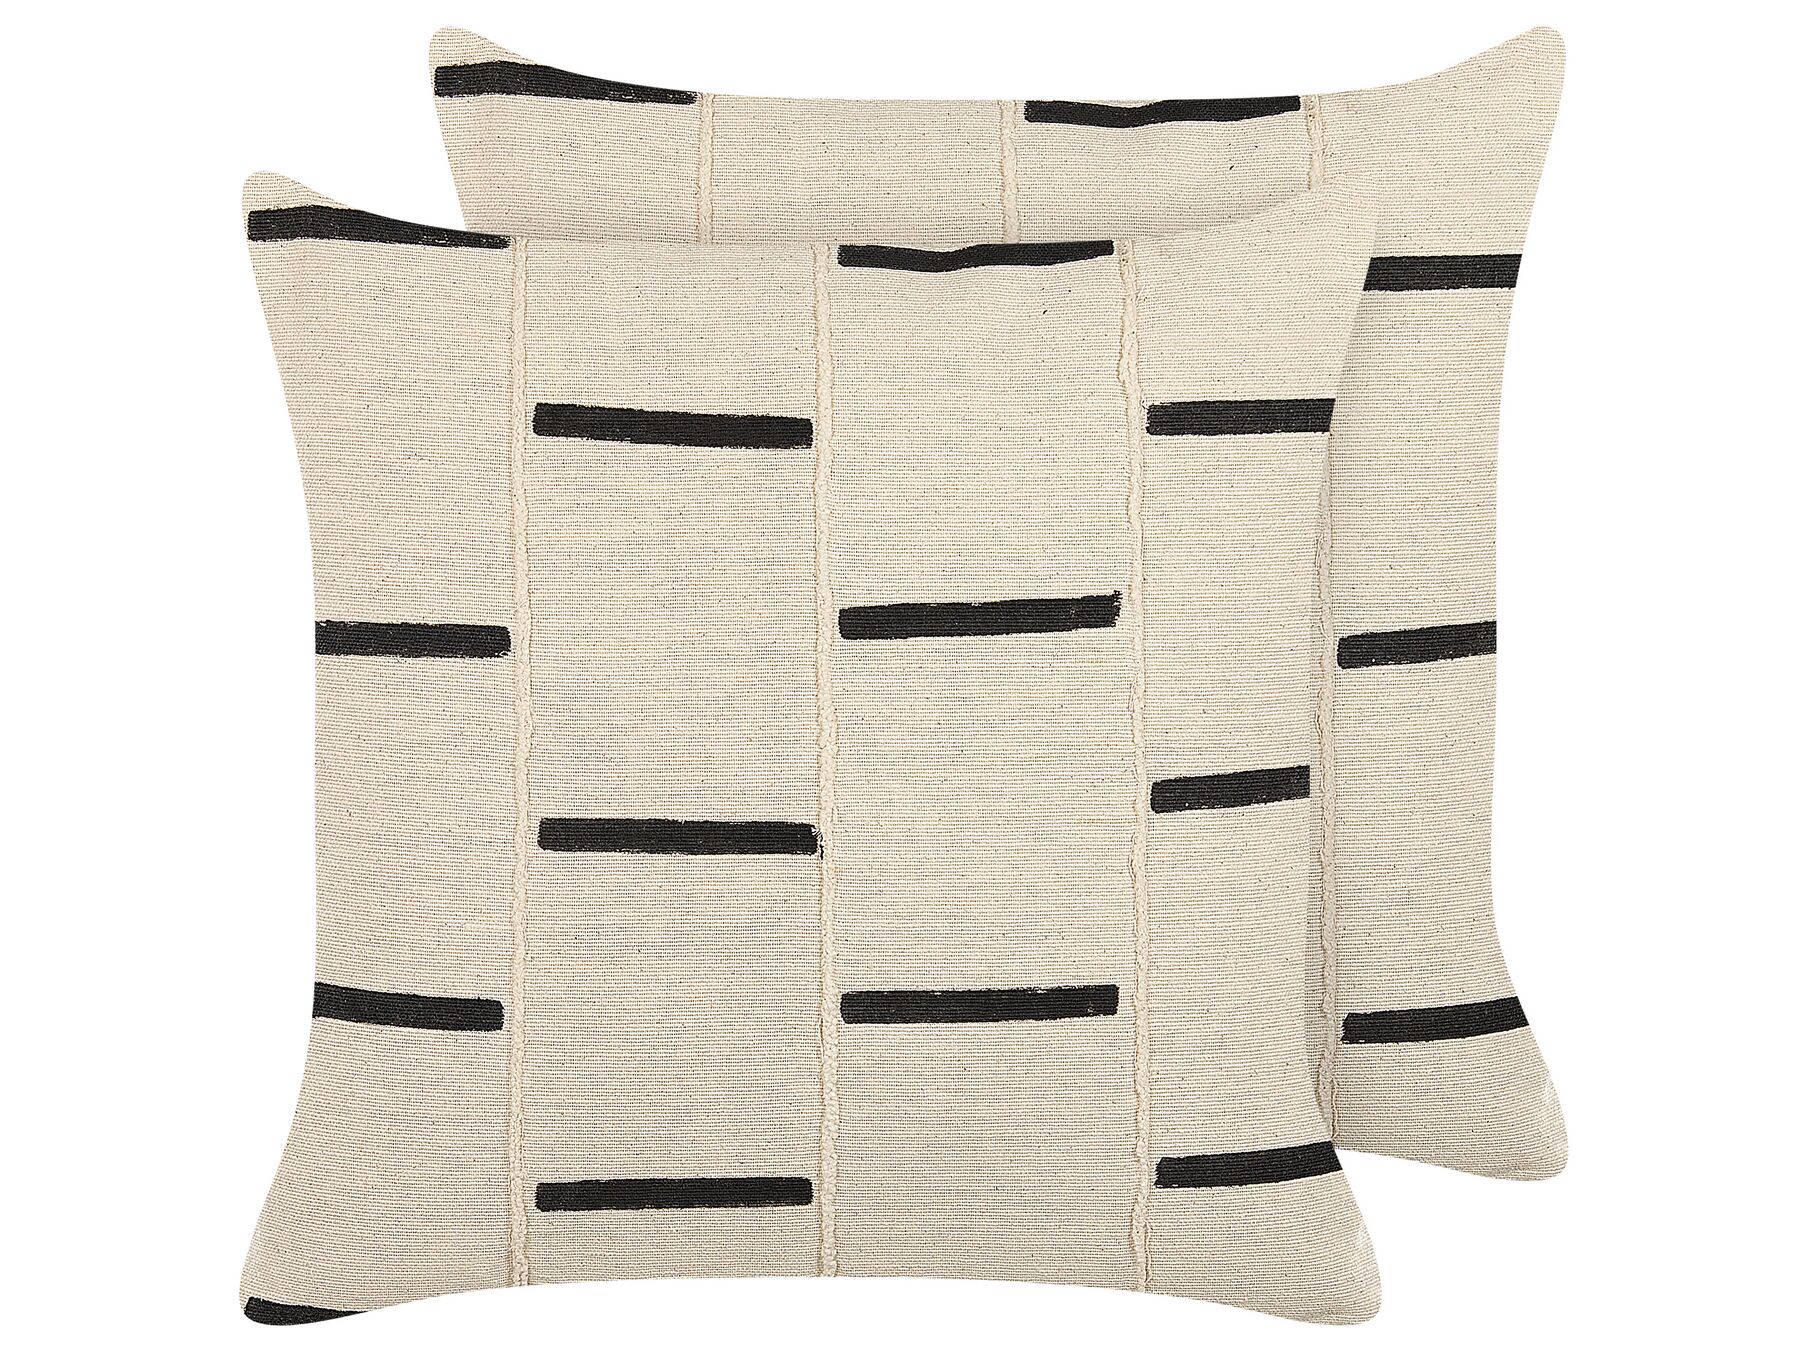 Set of 2 Cotton Cushions Striped 45 x 45 cm Beige and Black ABIES_838763